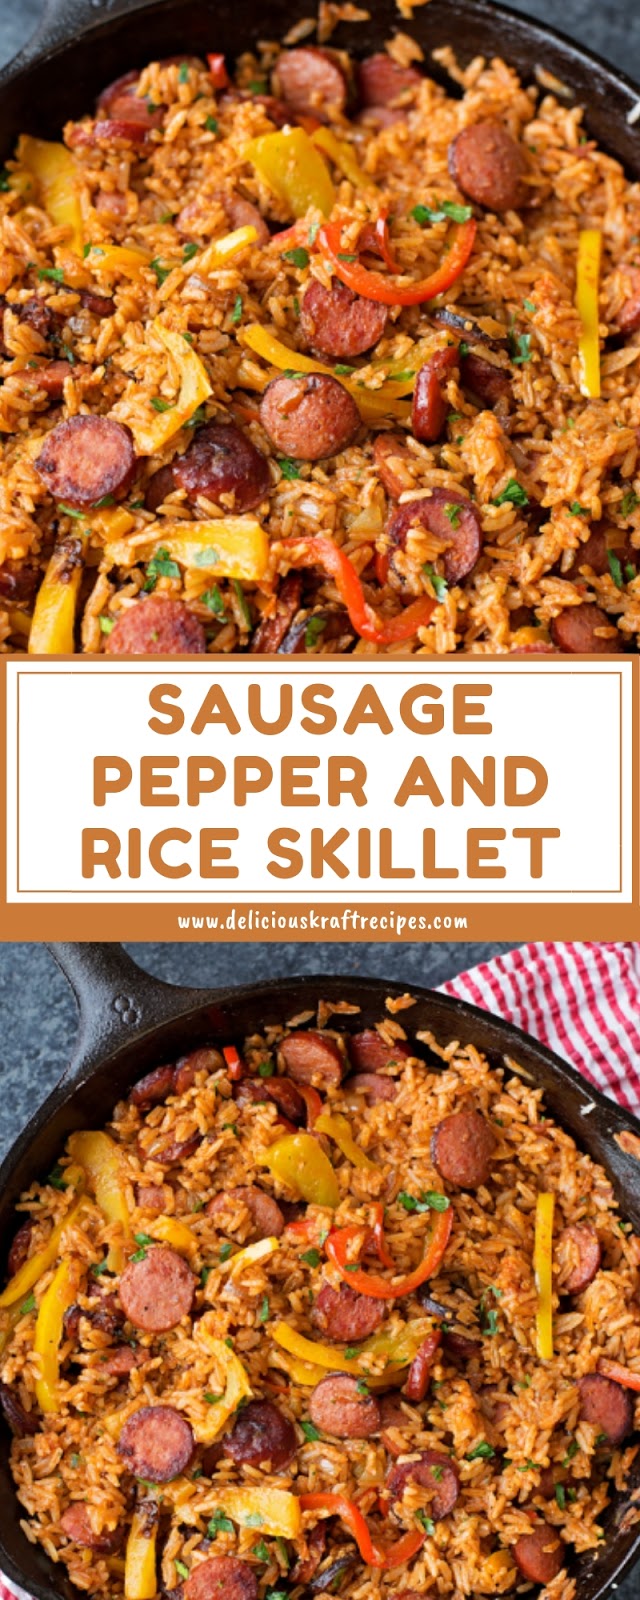 SAUSAGE PEPPER AND RICE SKILLET